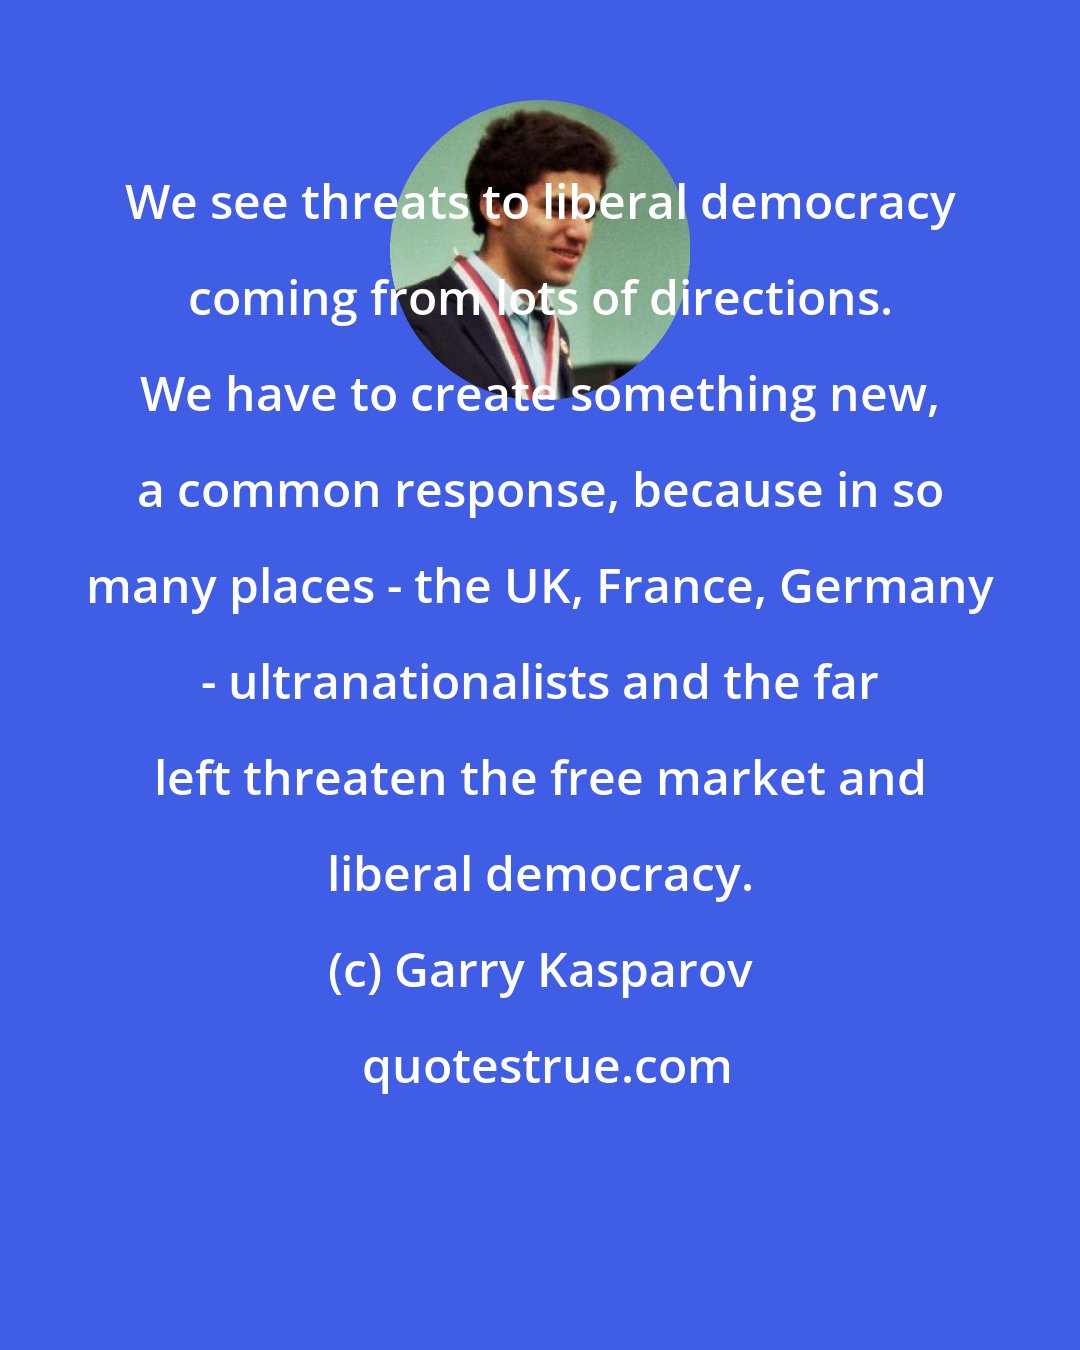 Garry Kasparov: We see threats to liberal democracy coming from lots of directions. We have to create something new, a common response, because in so many places - the UK, France, Germany - ultranationalists and the far left threaten the free market and liberal democracy.